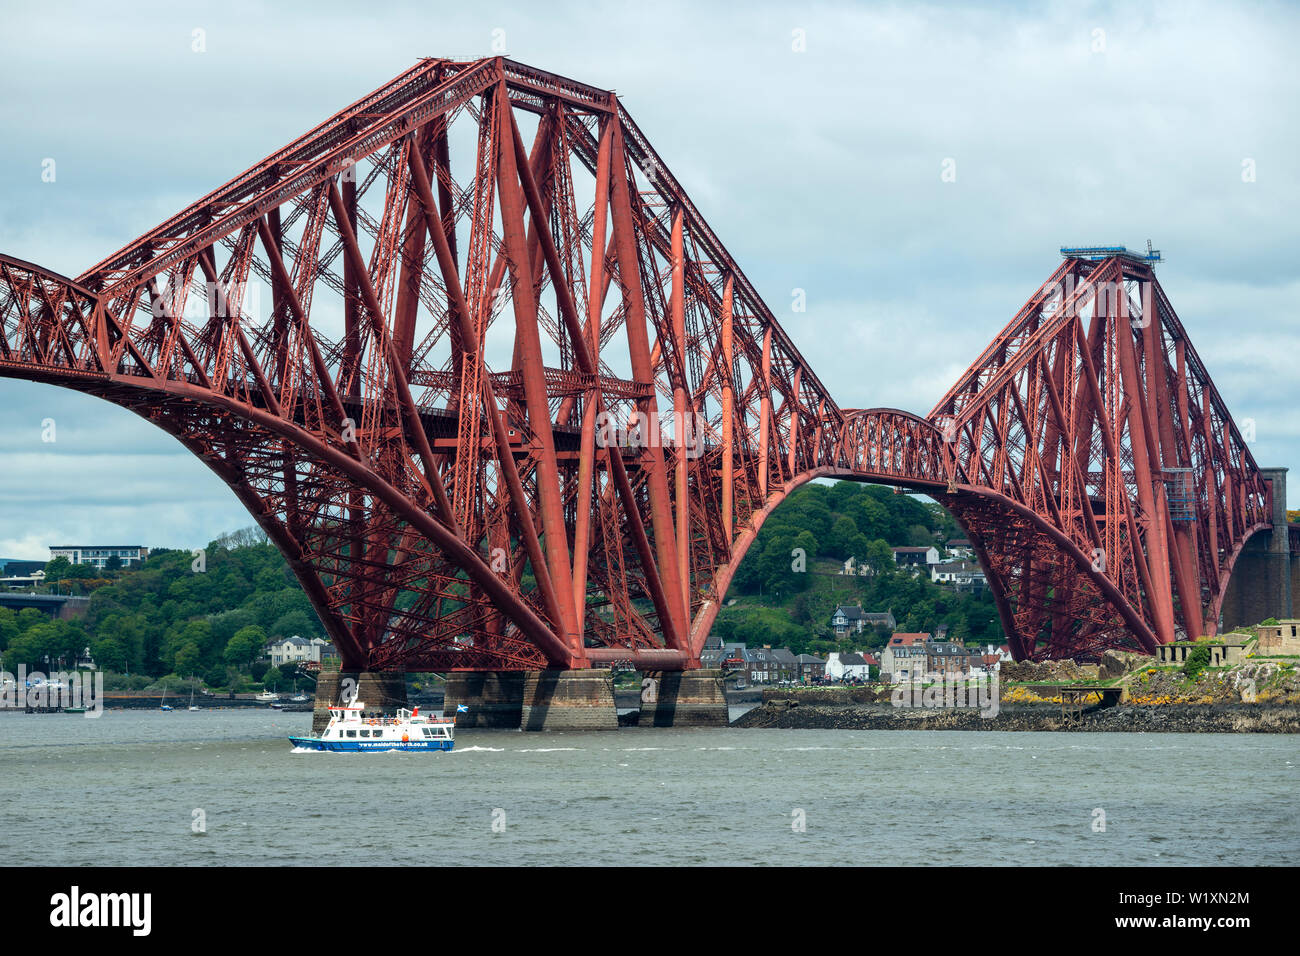 Inchcolm Island ferry Maid of the Forth passing under Forth Rail Bridge heading for Haws Pier in South Queensferry, Scotland, UK Stock Photo